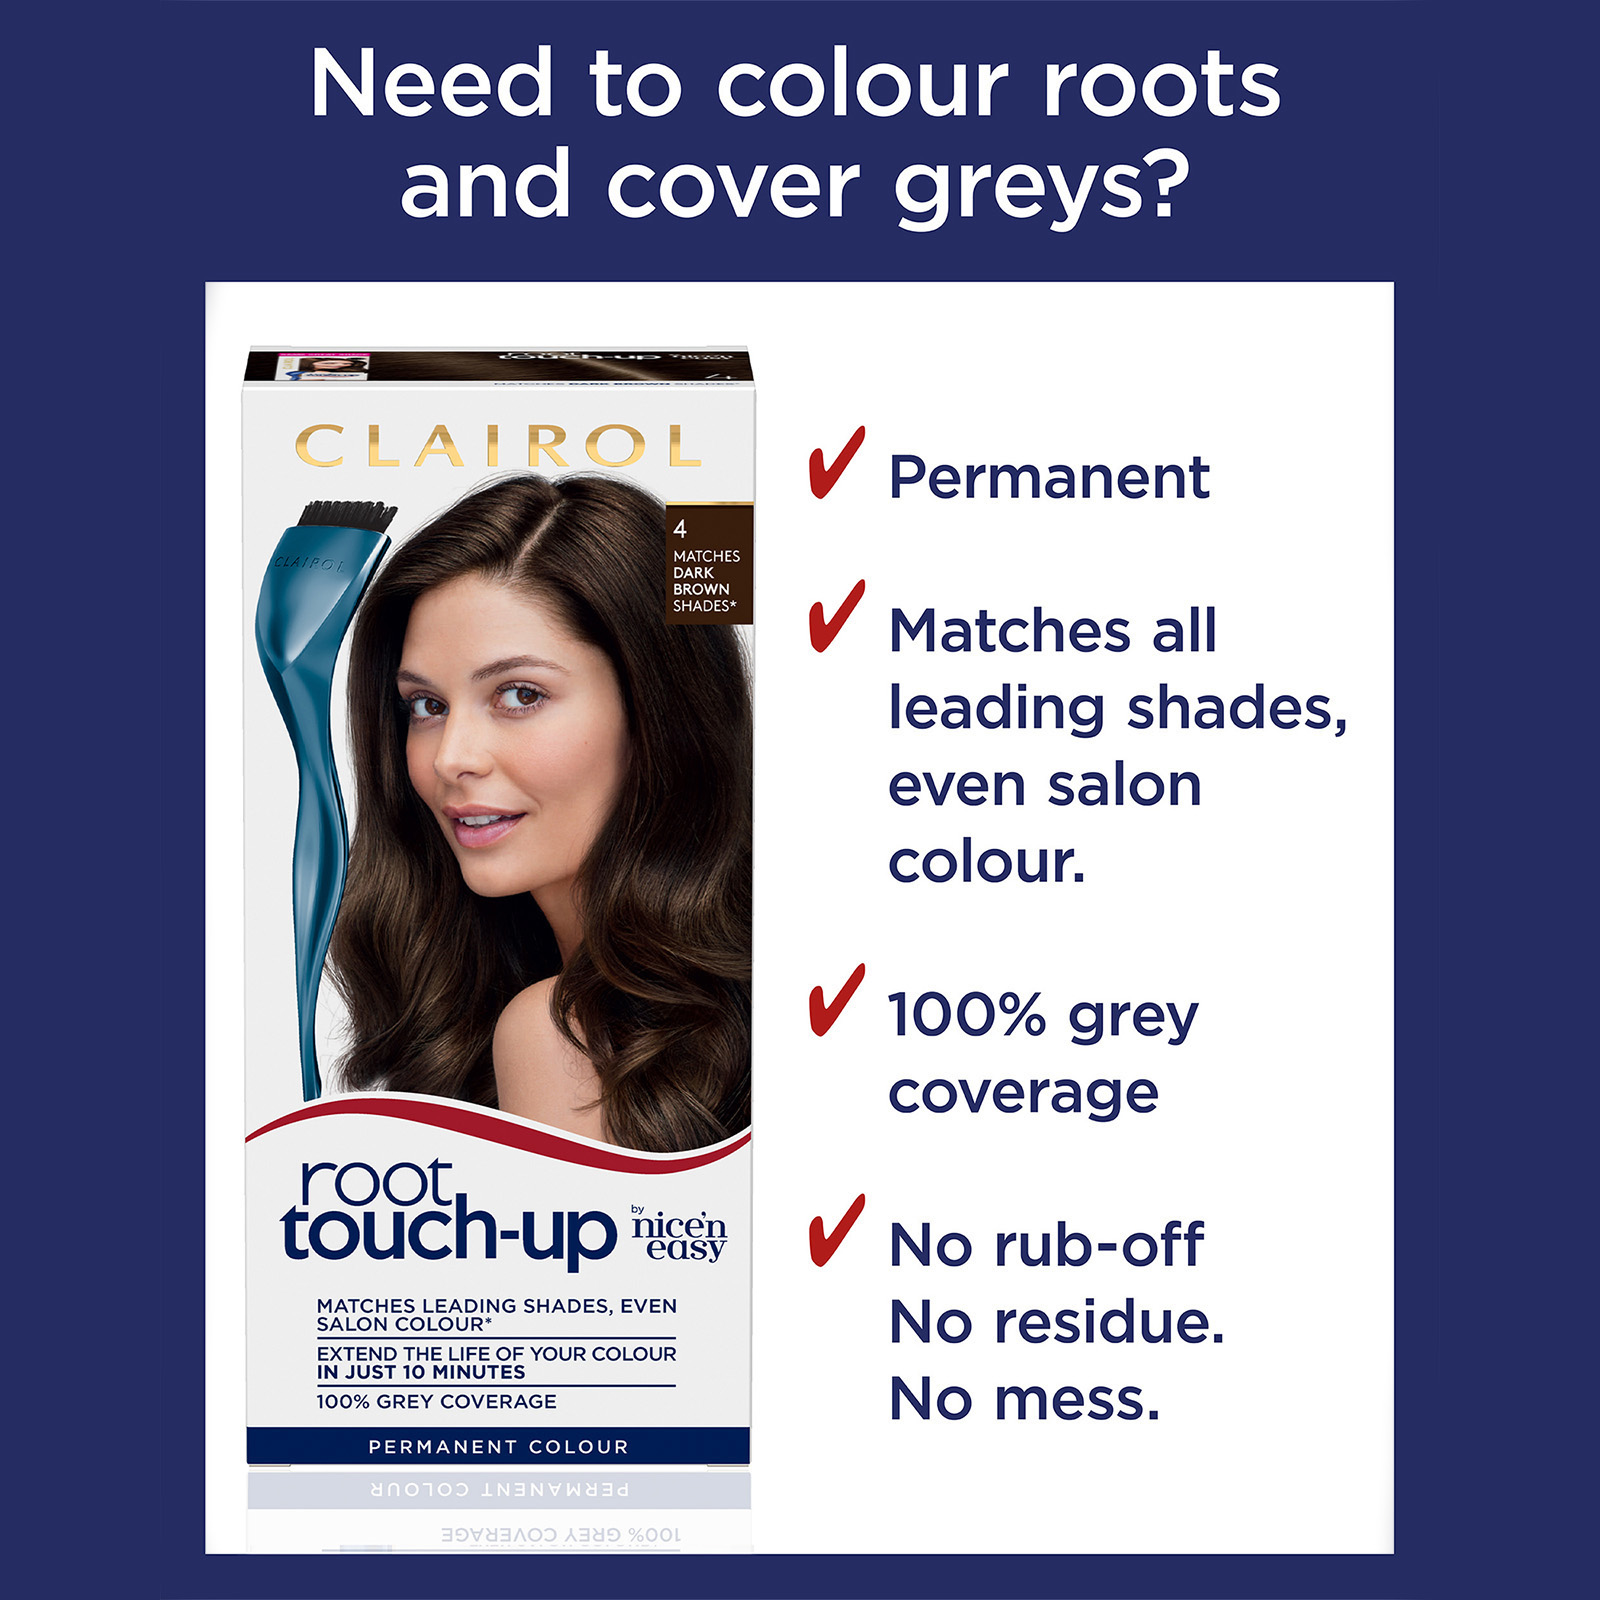 Need to colour roots and cover greys?